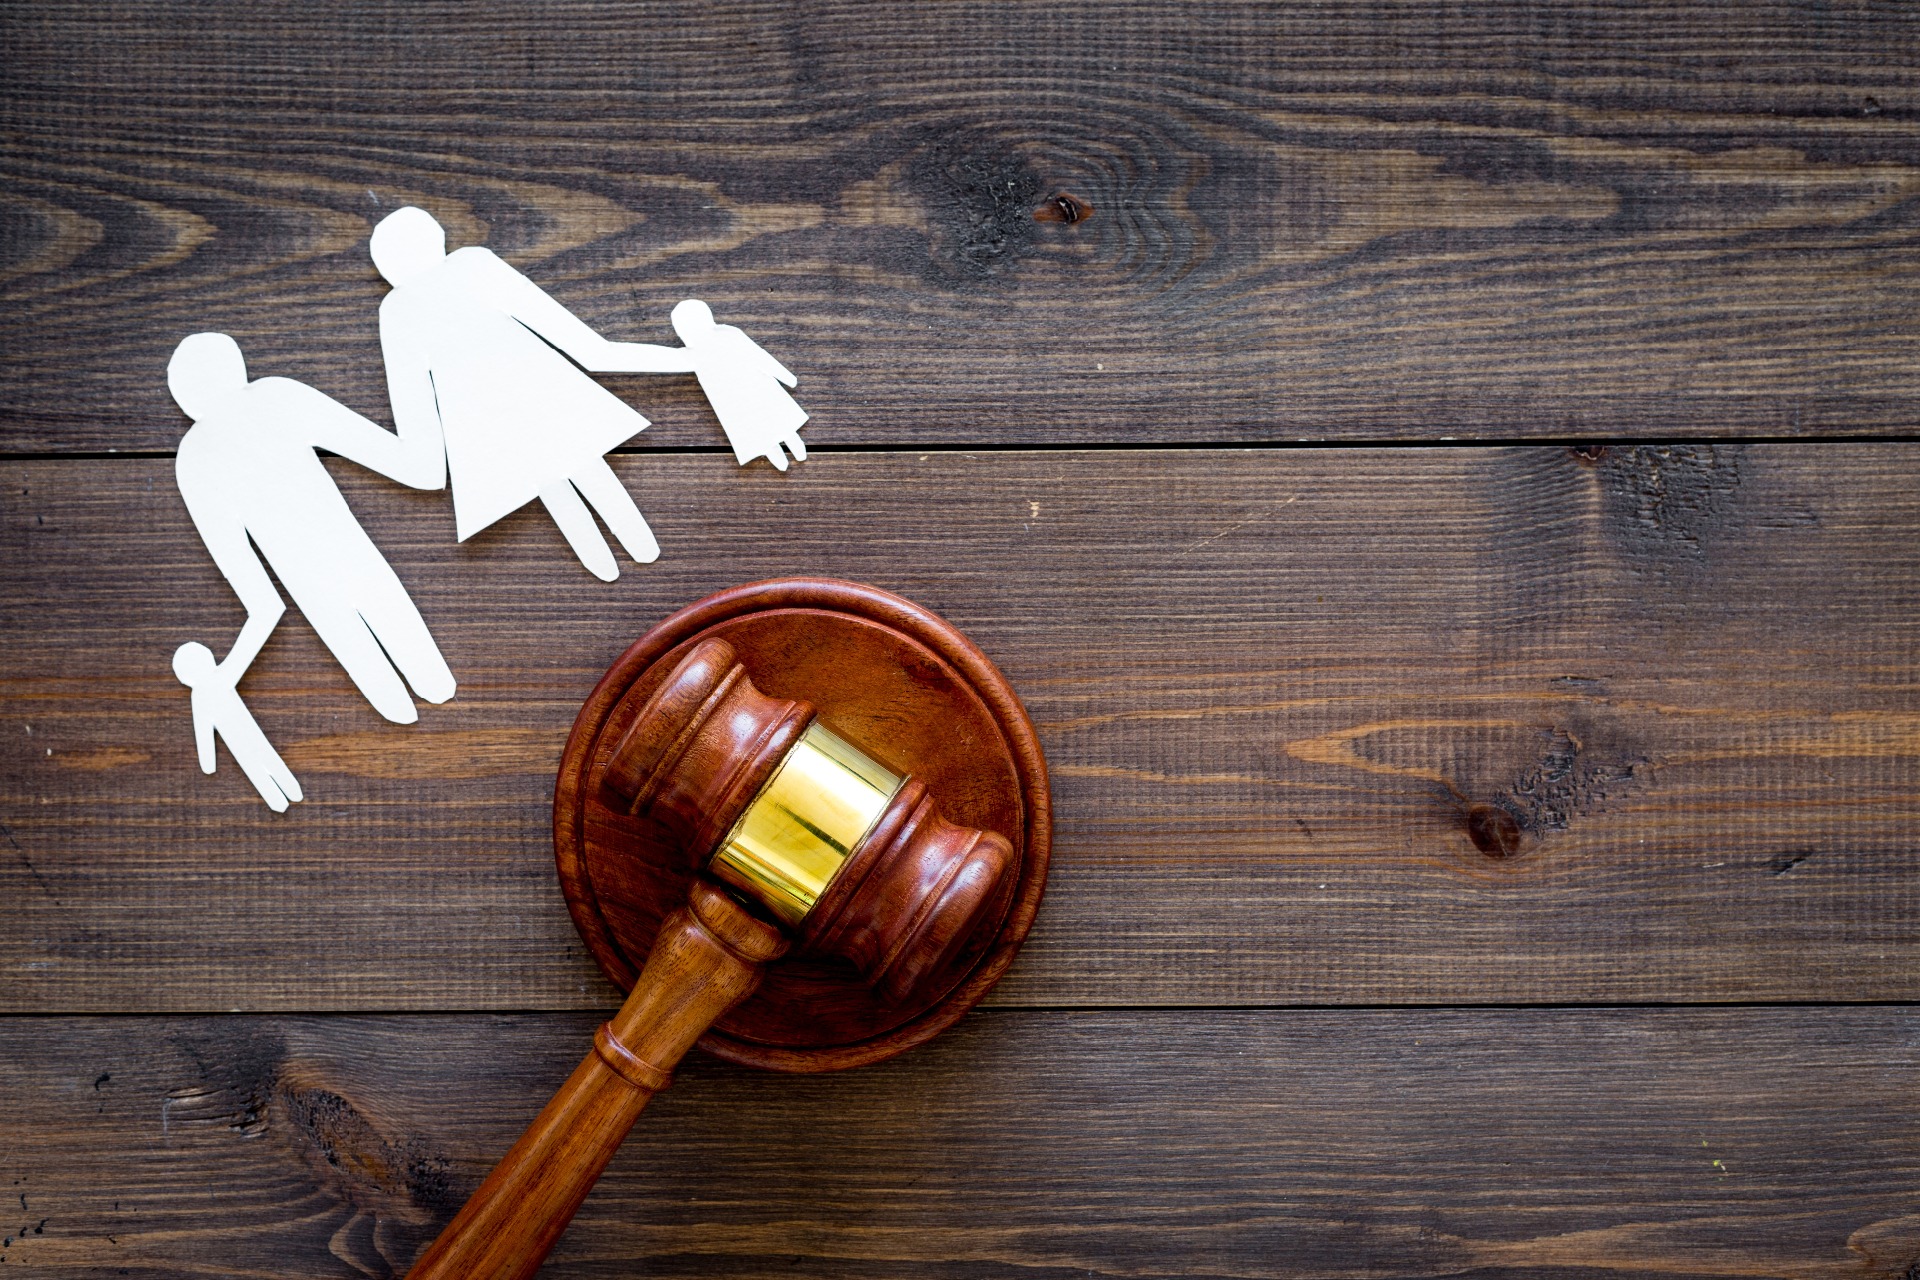 A paper cut out family, including two parents and two children, next to a gavel.